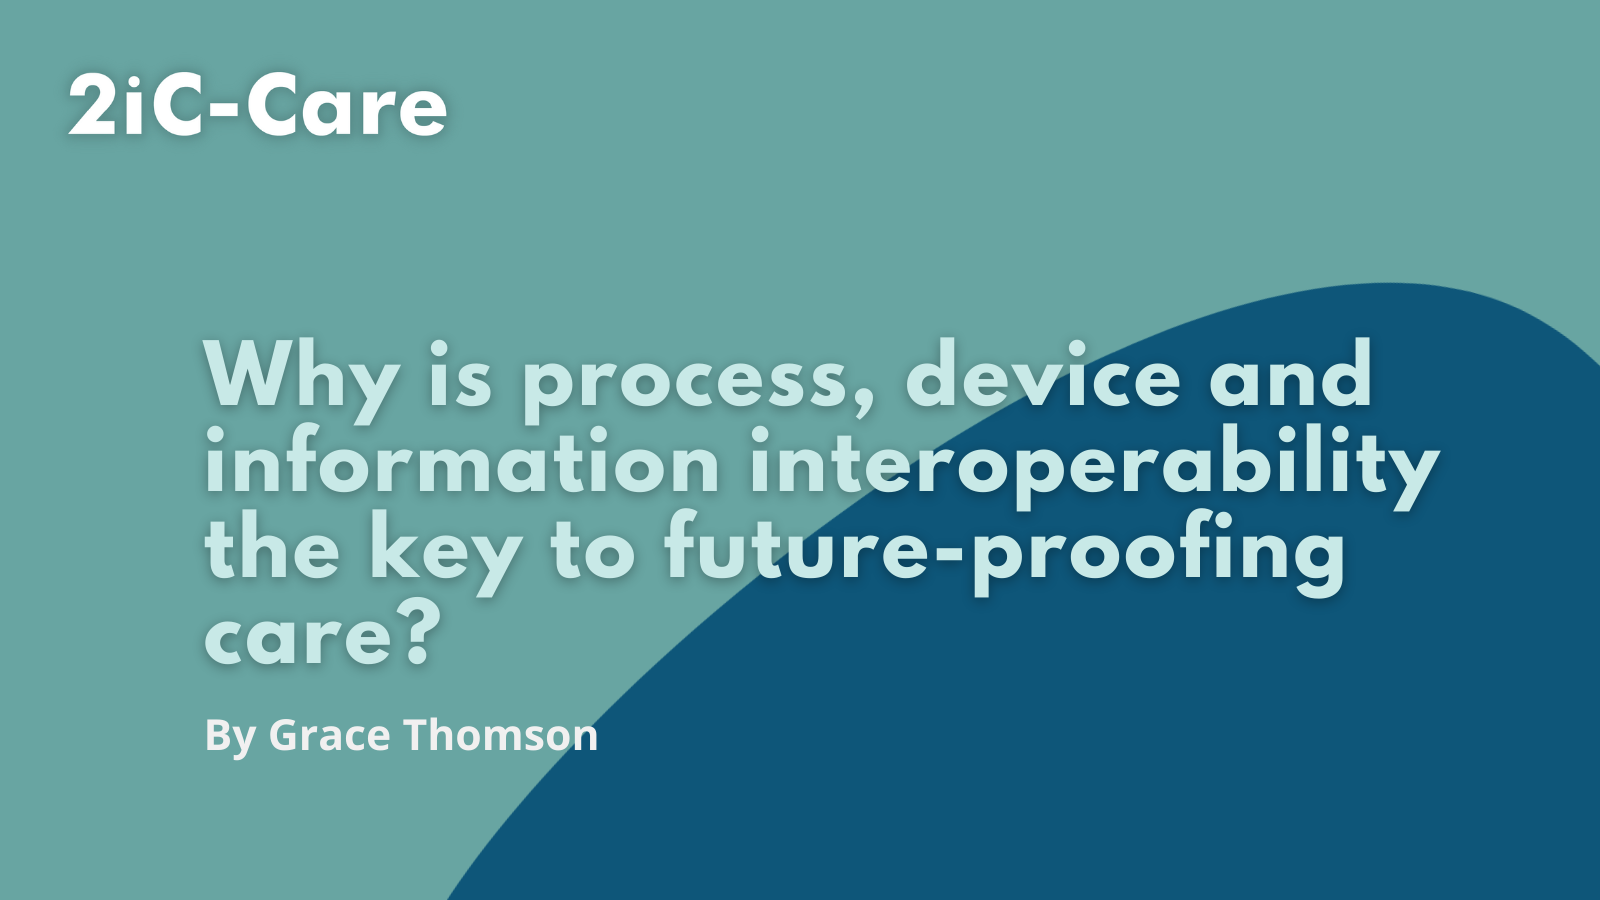 Why is process, device and information interoperability the key to future-proofing care?